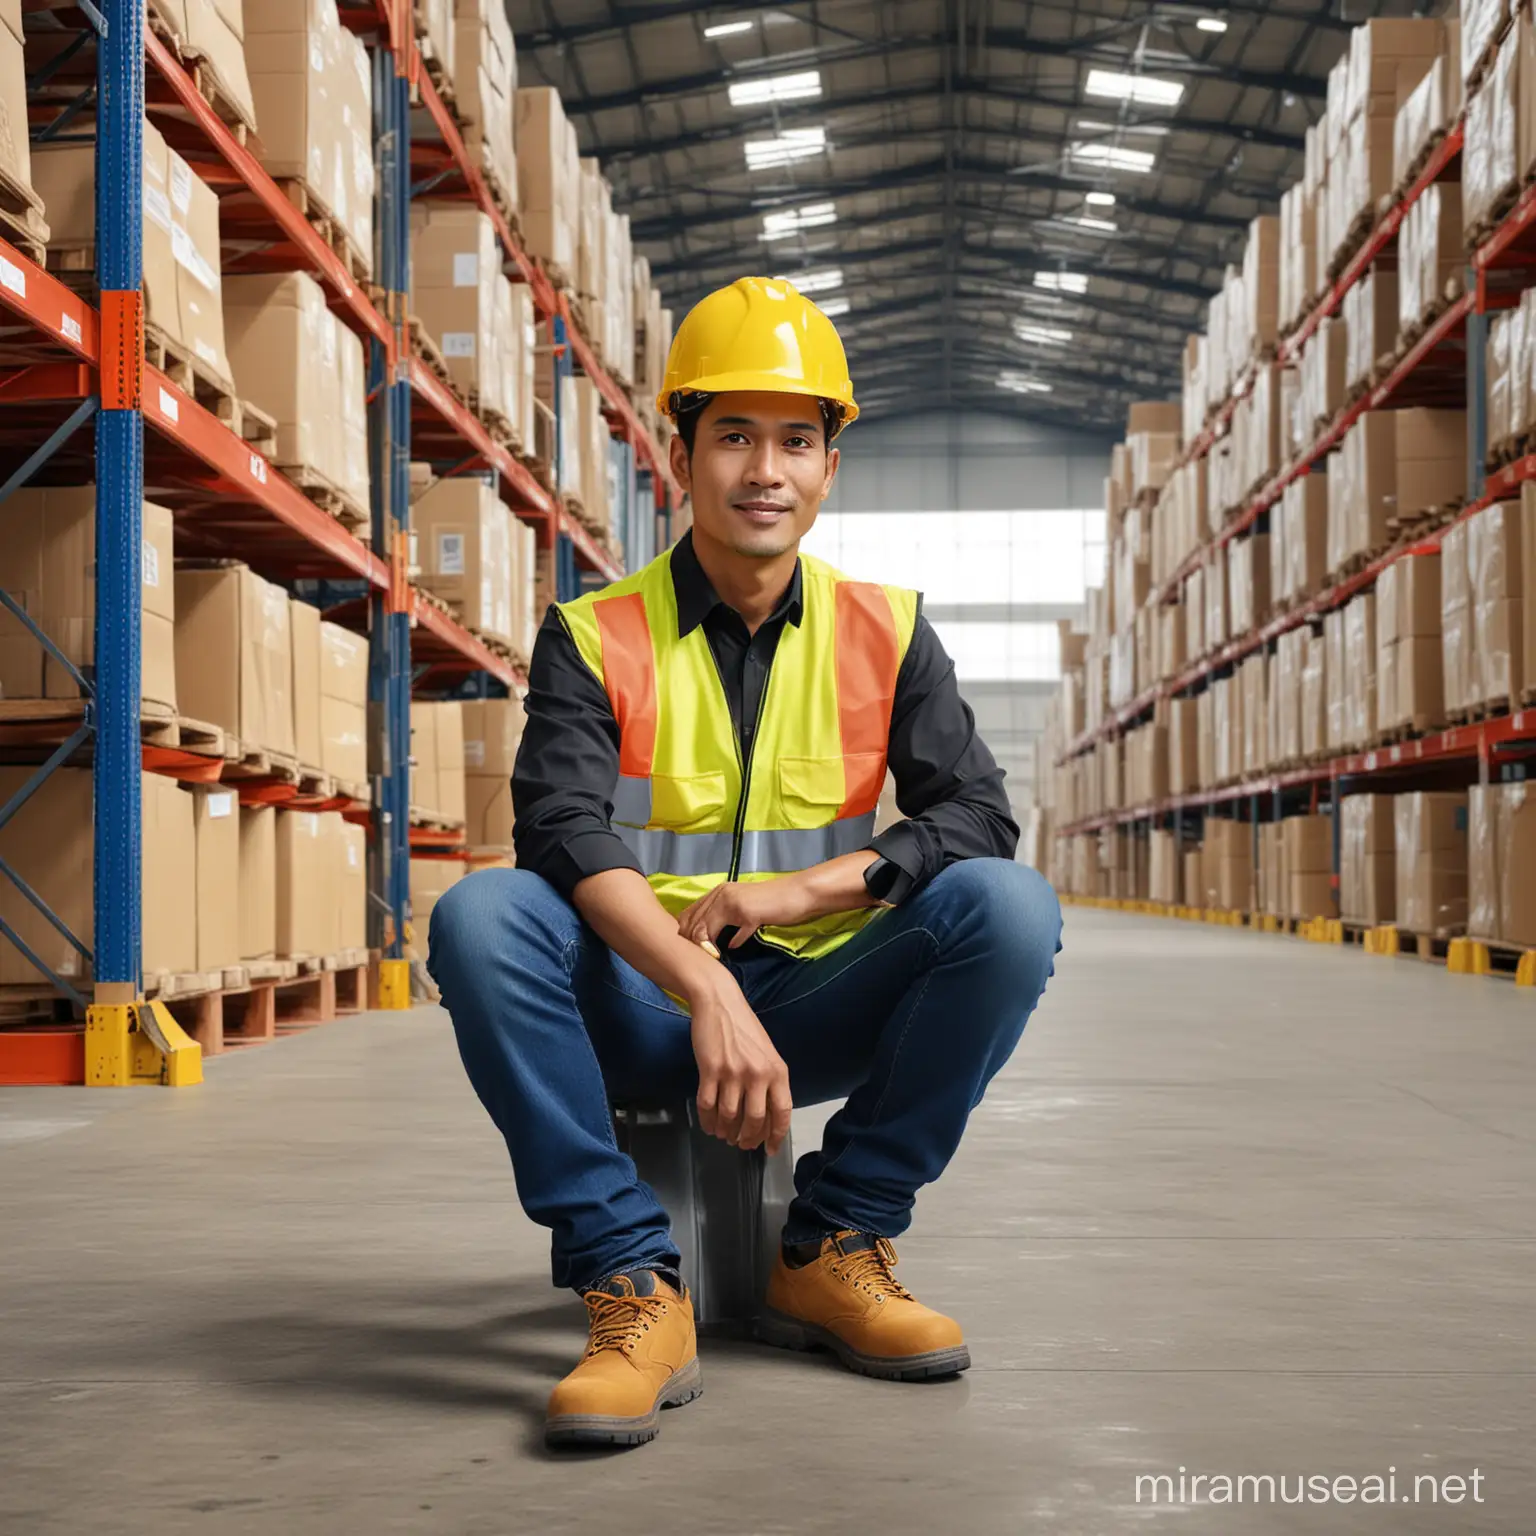 Indonesian Warehouse Worker on Red Hand Lift at Distribution Center